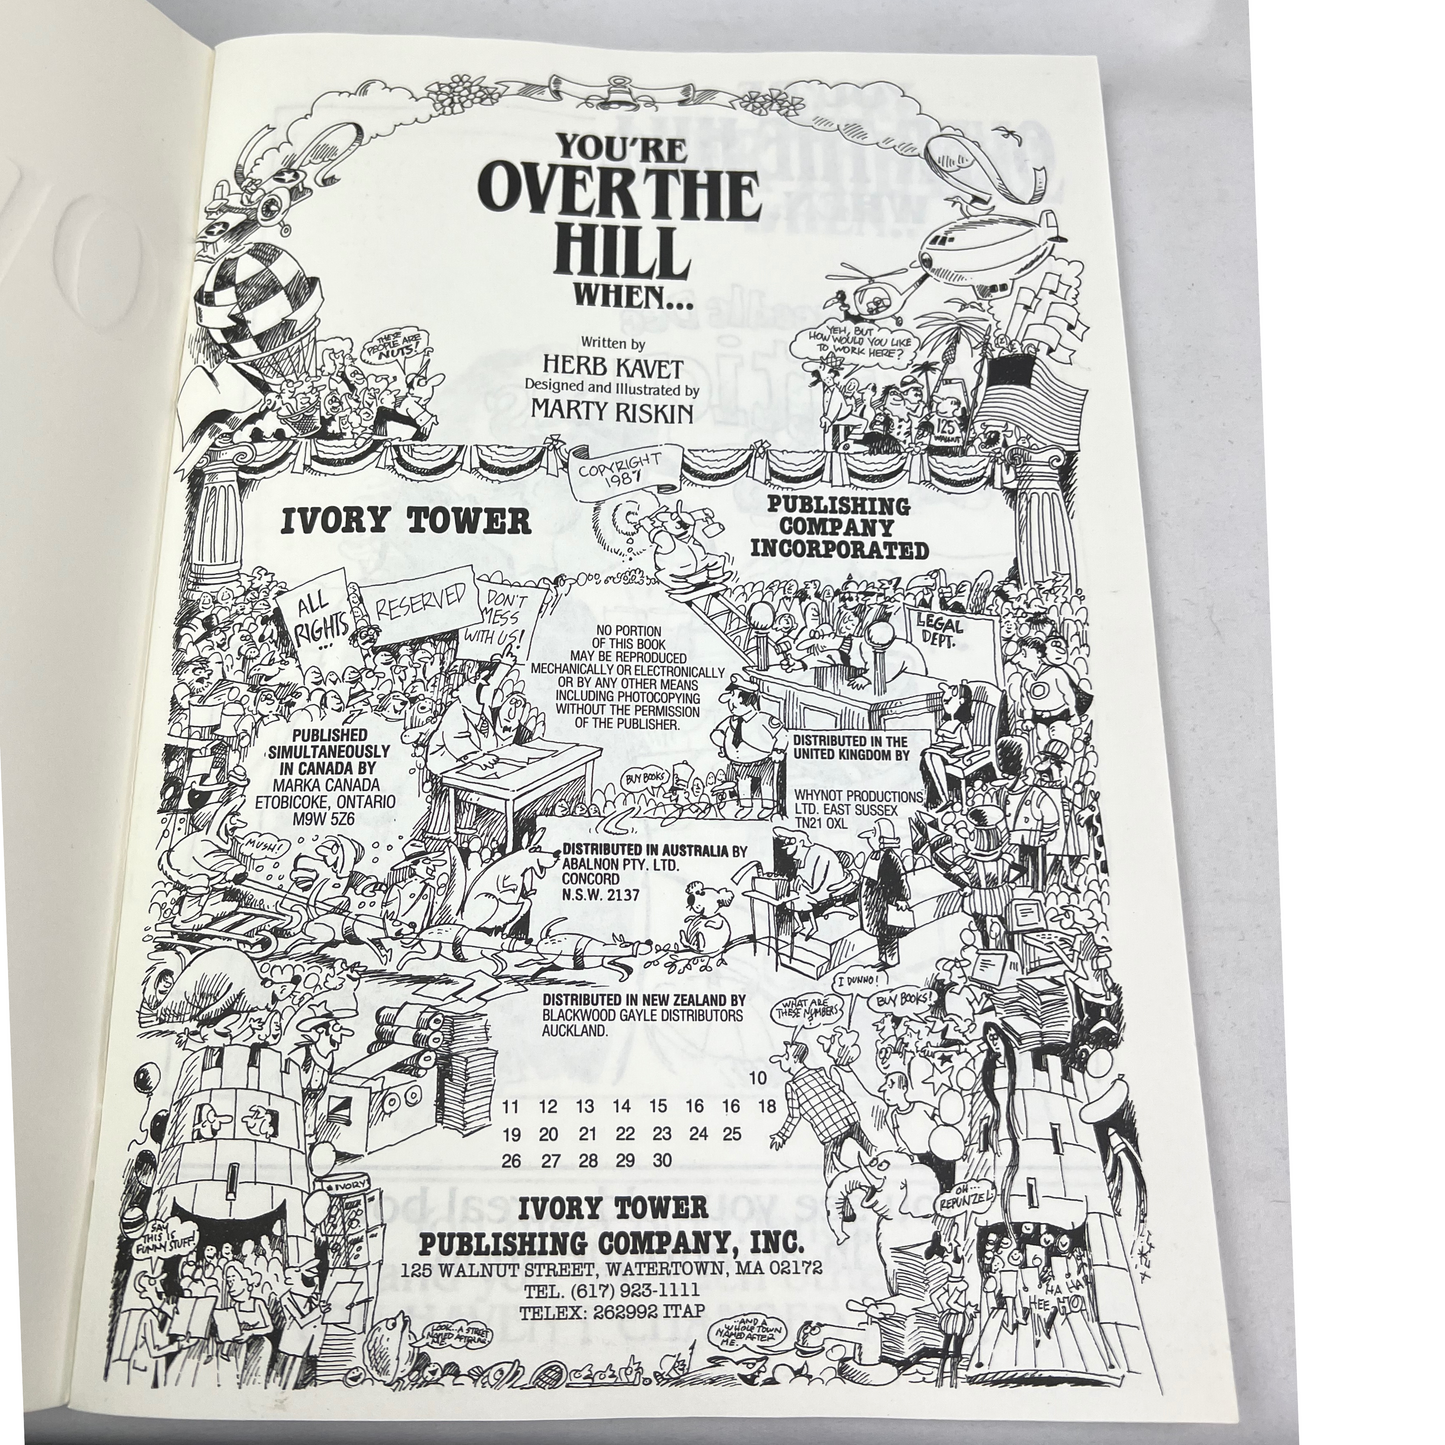 80’s You’re Over the Hill When….Funny Satire Book